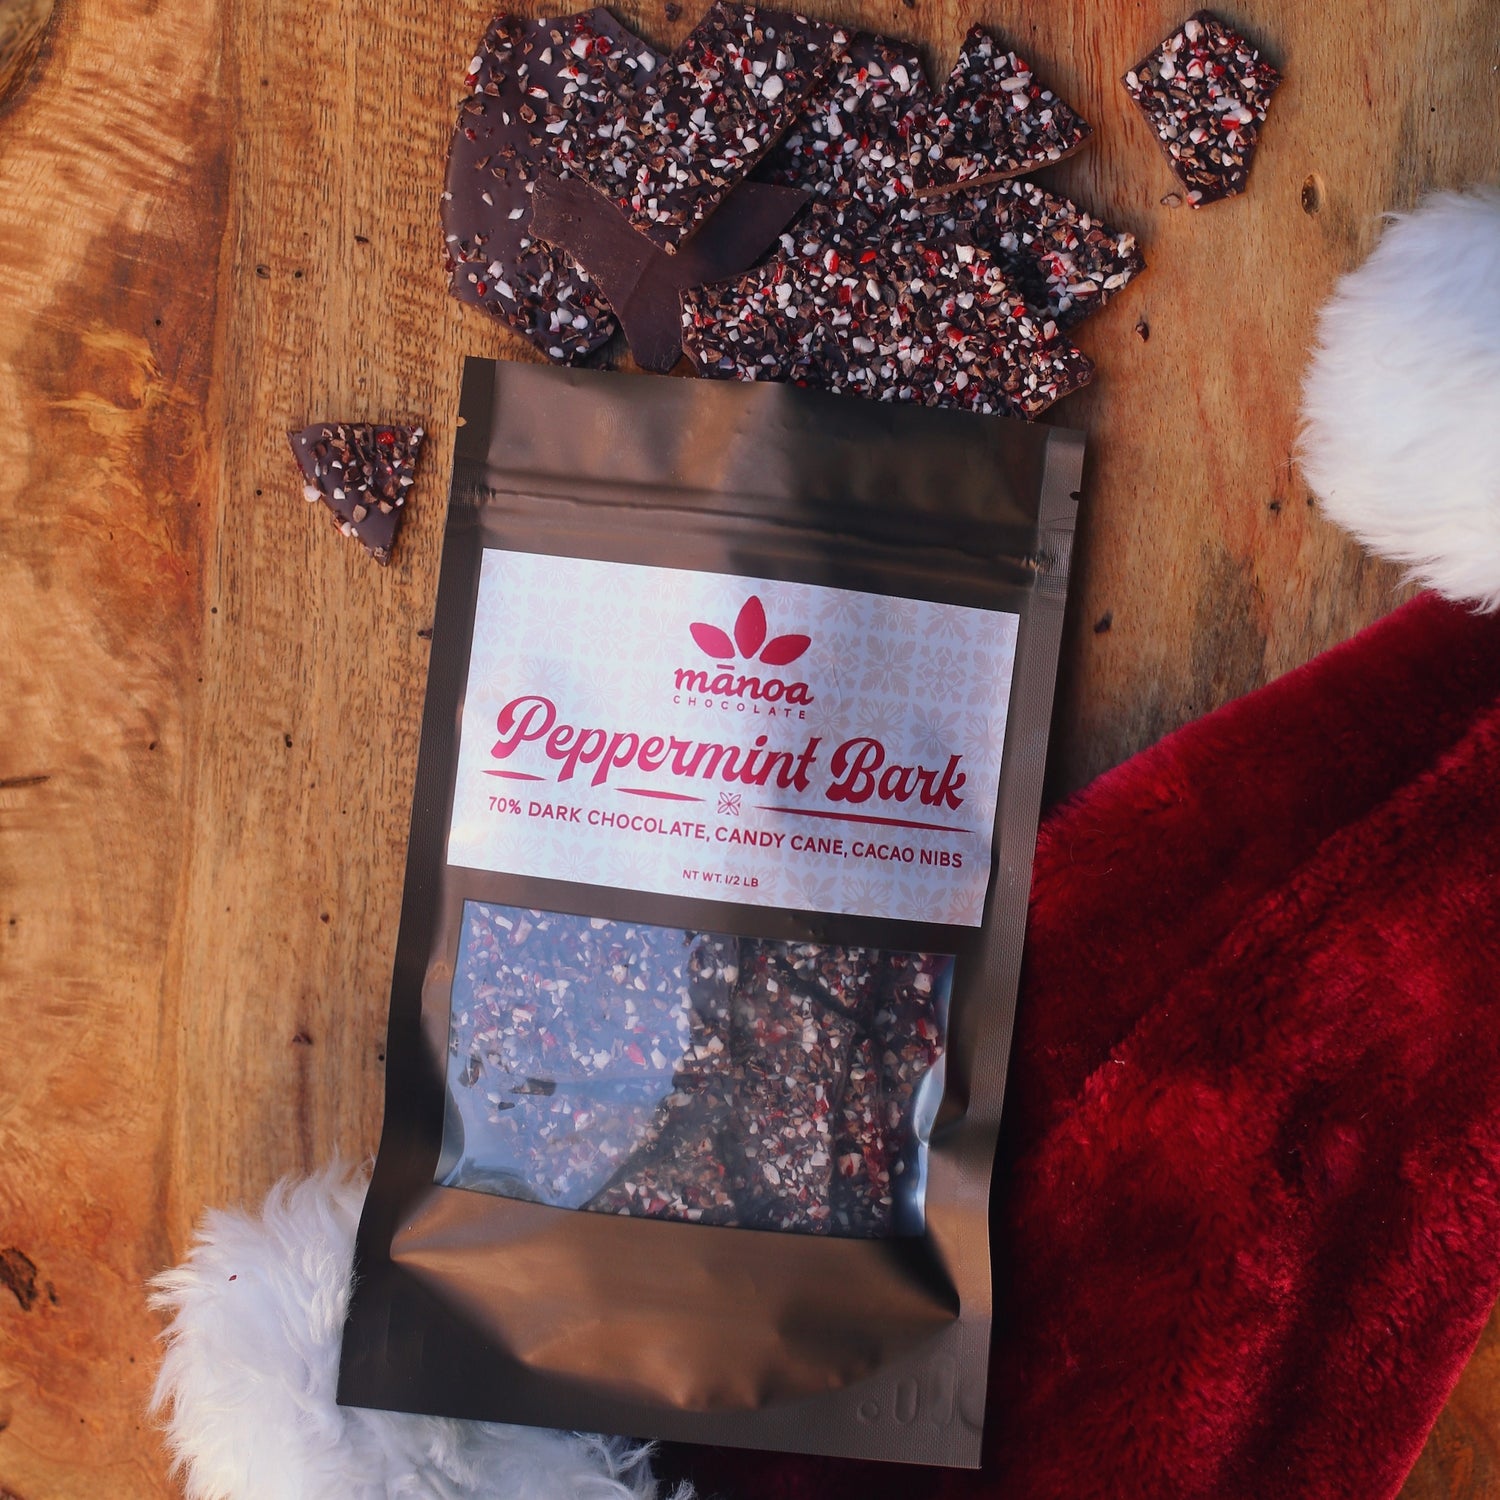 Image of peppermint bark spilling out of bag onto table